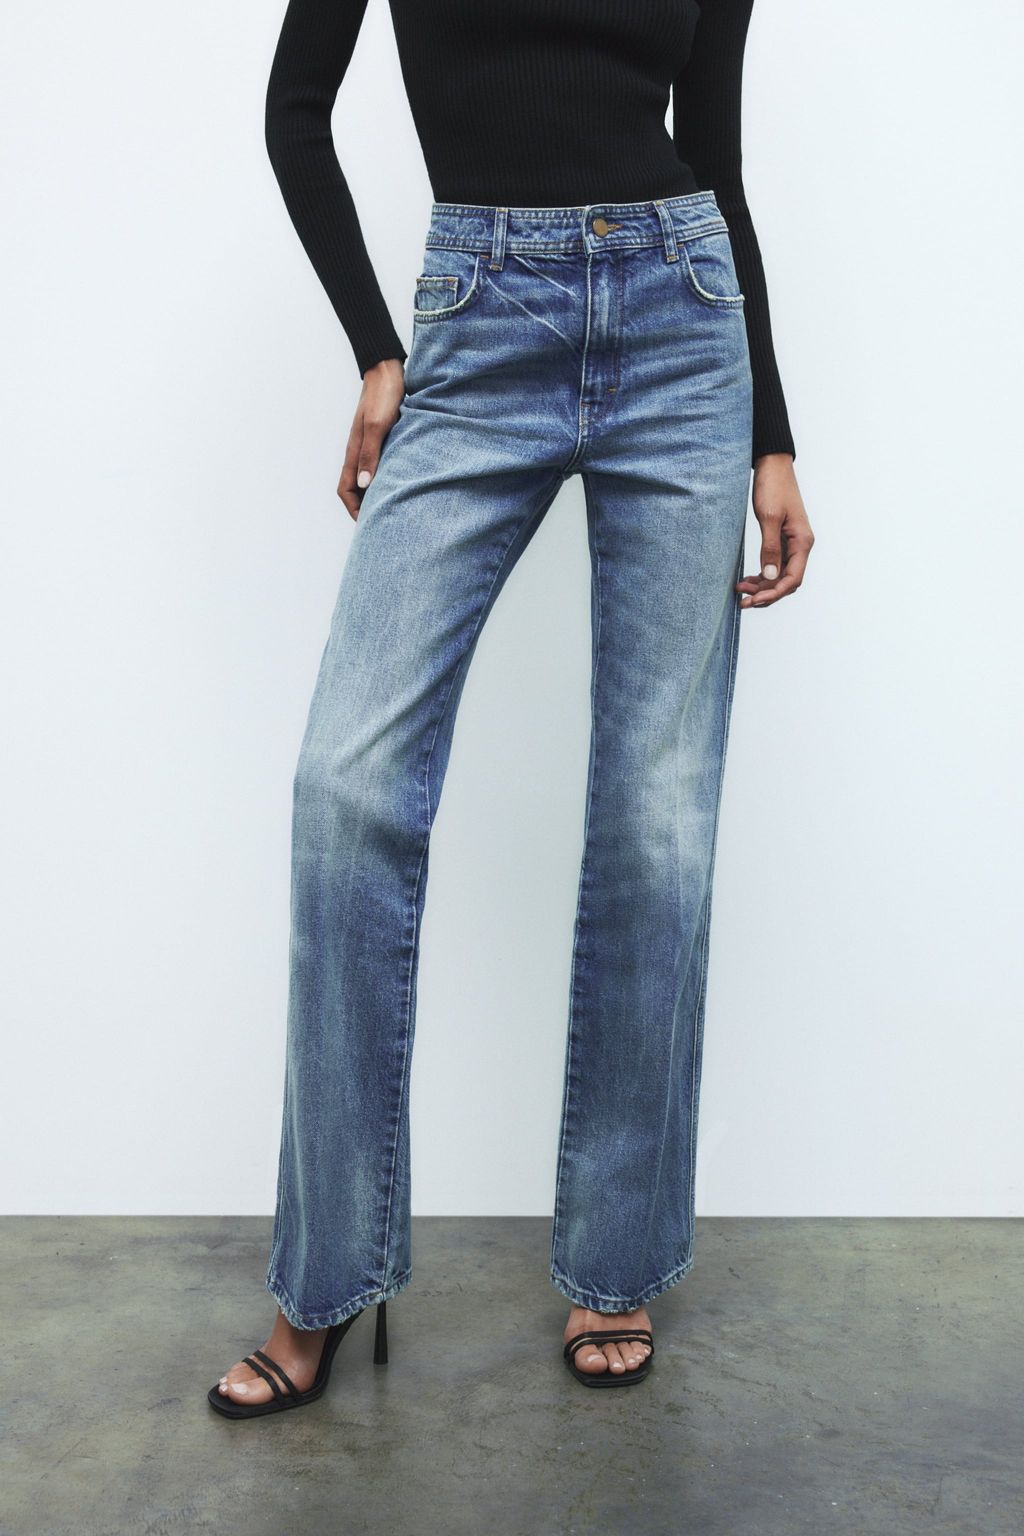 Katie Holmes's $80 Mango Jeans Will Sell Out by Tomorrow | Who What Wear